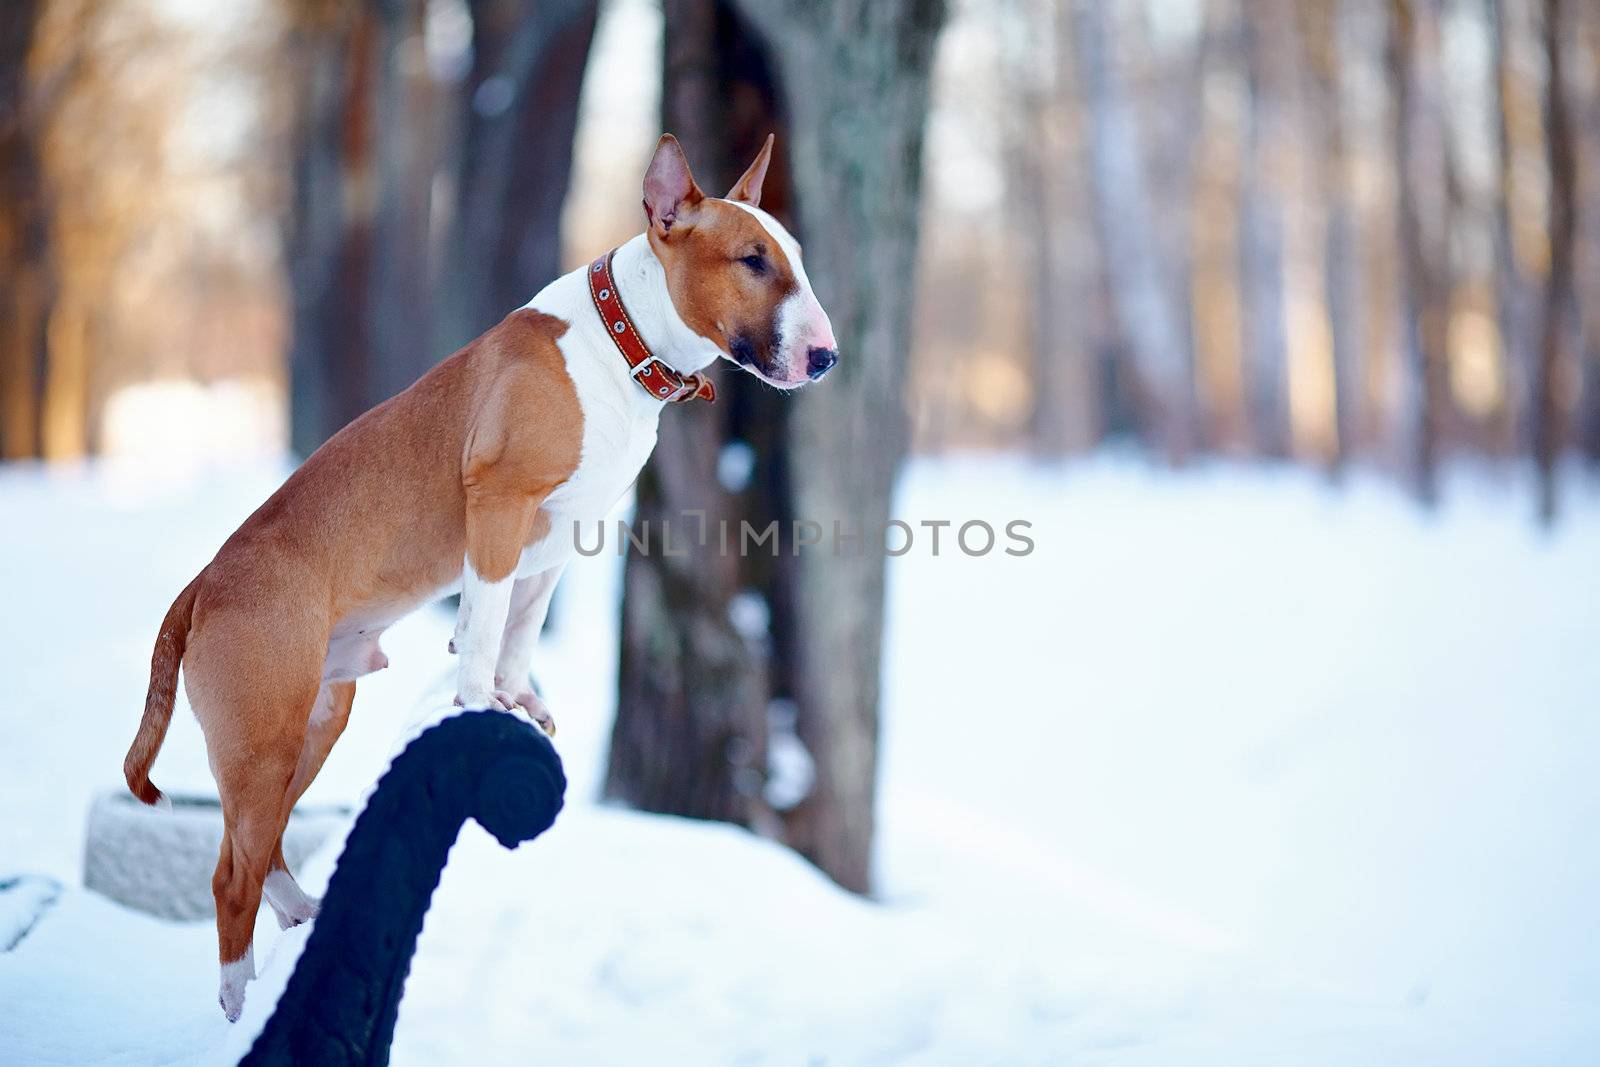 English bull terrier. Thoroughbred dog. Canine friend. Red dog. Dog on a bench. Dog on walk.